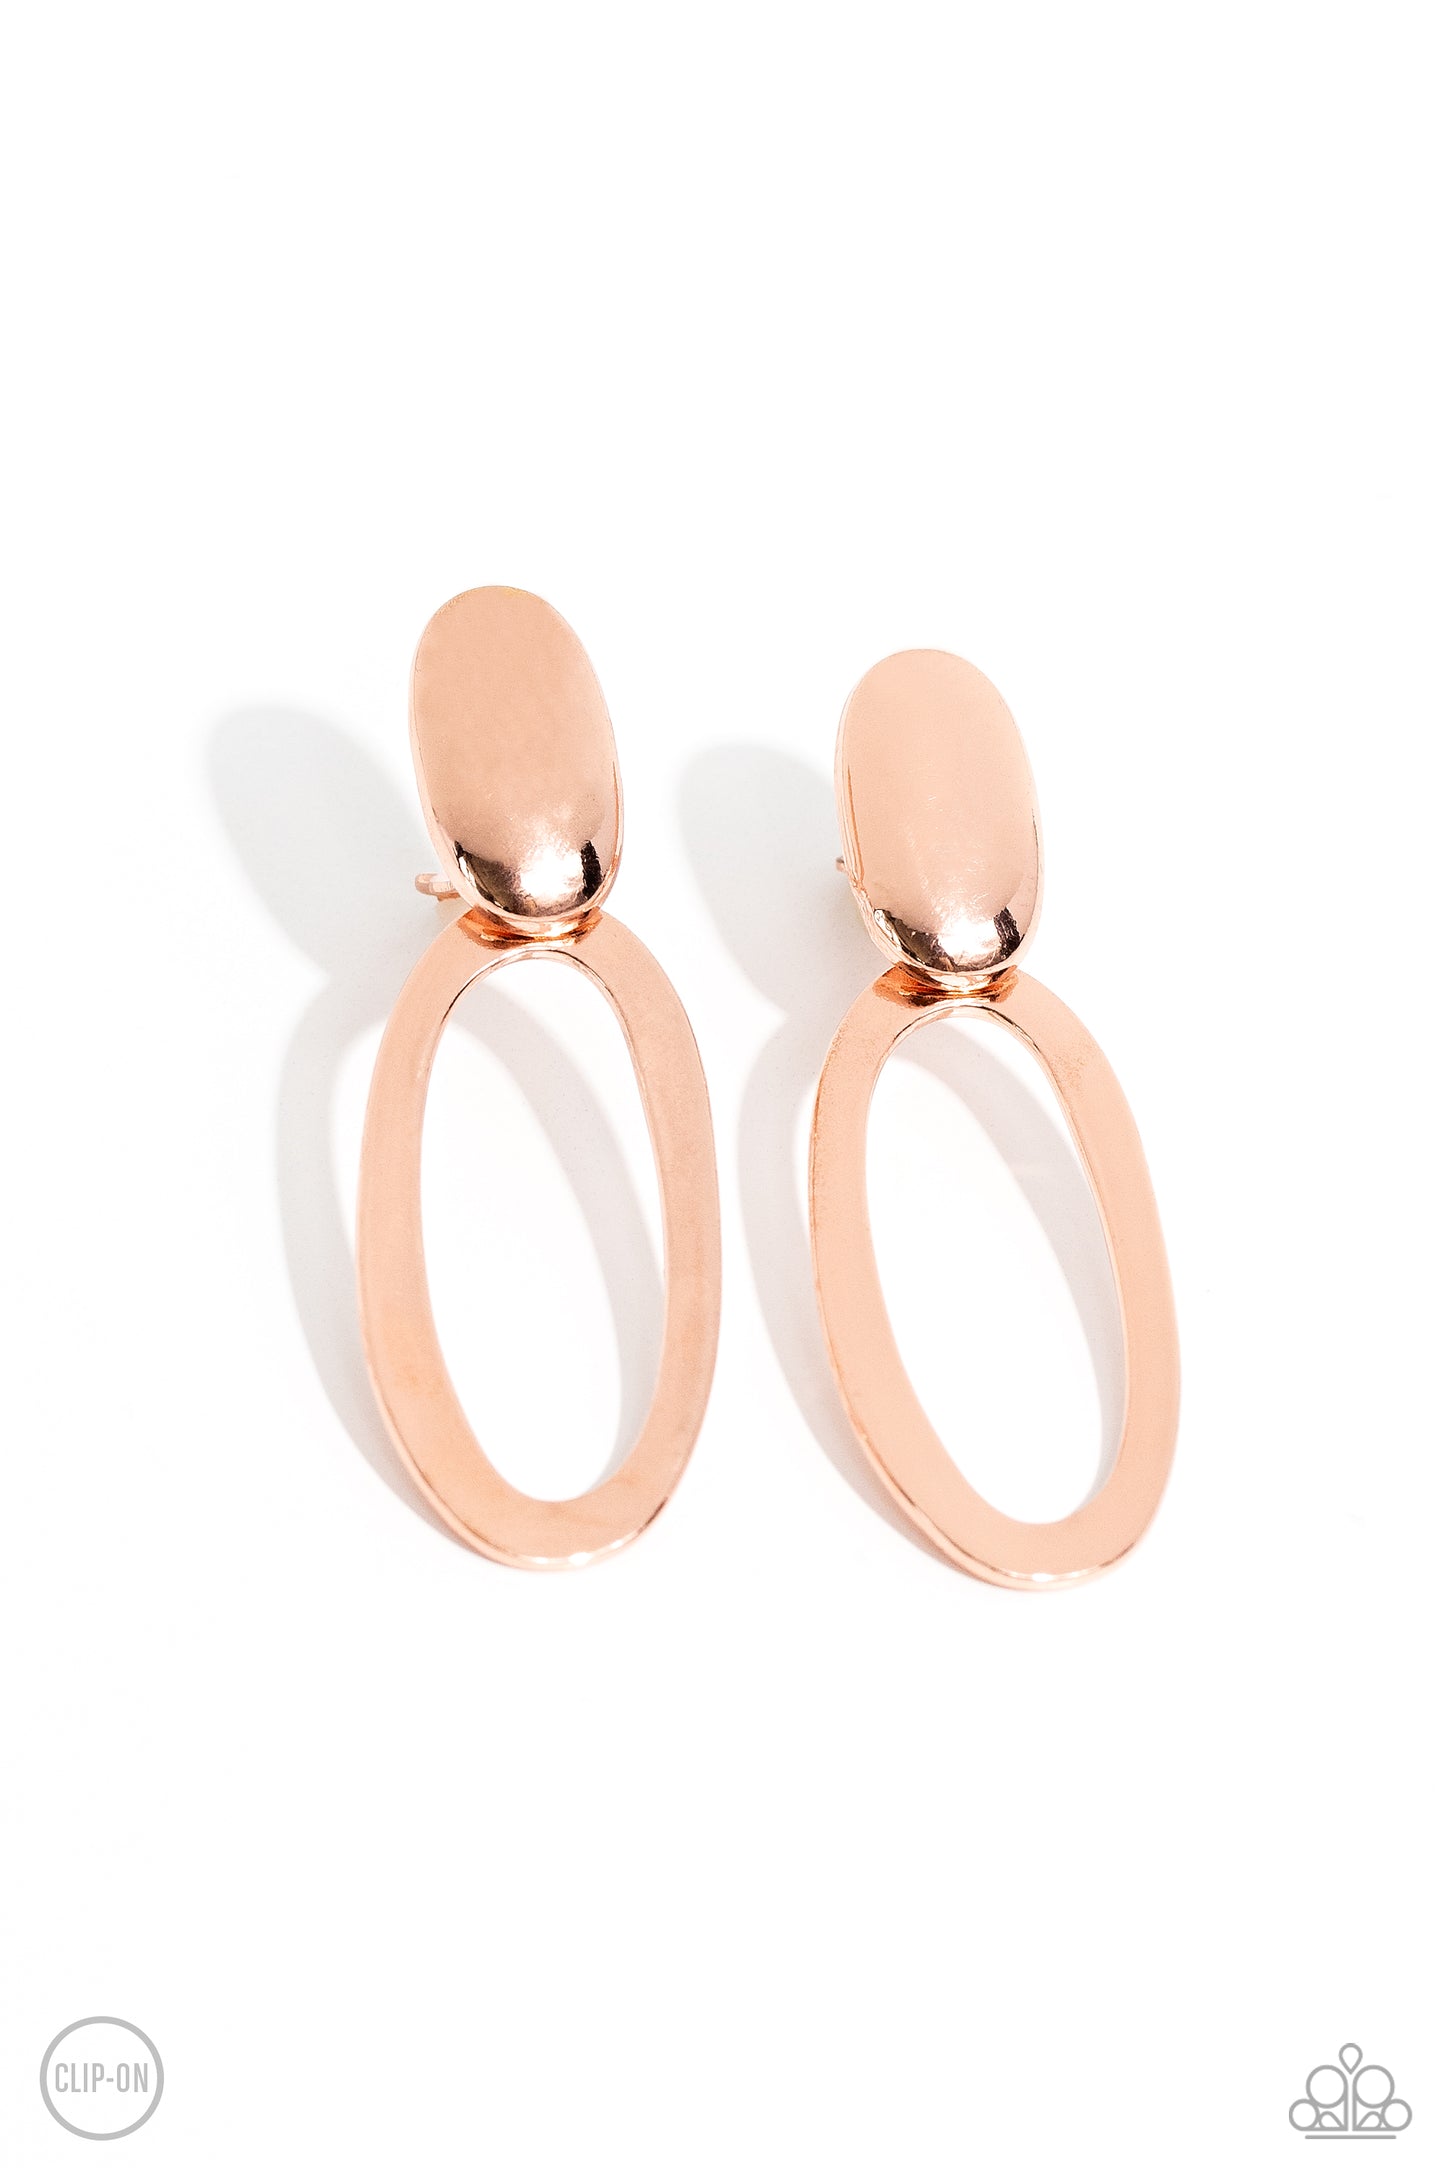 Pull OVAL! - copper - Paparazzi CLIP ON earrings